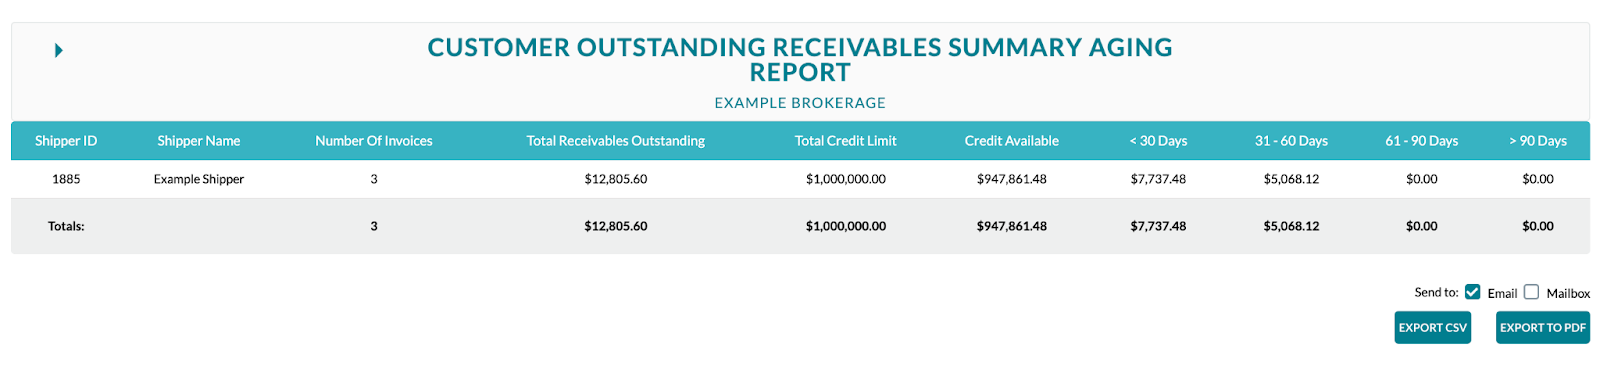 customer_outstanding_receivables_summary_2.png